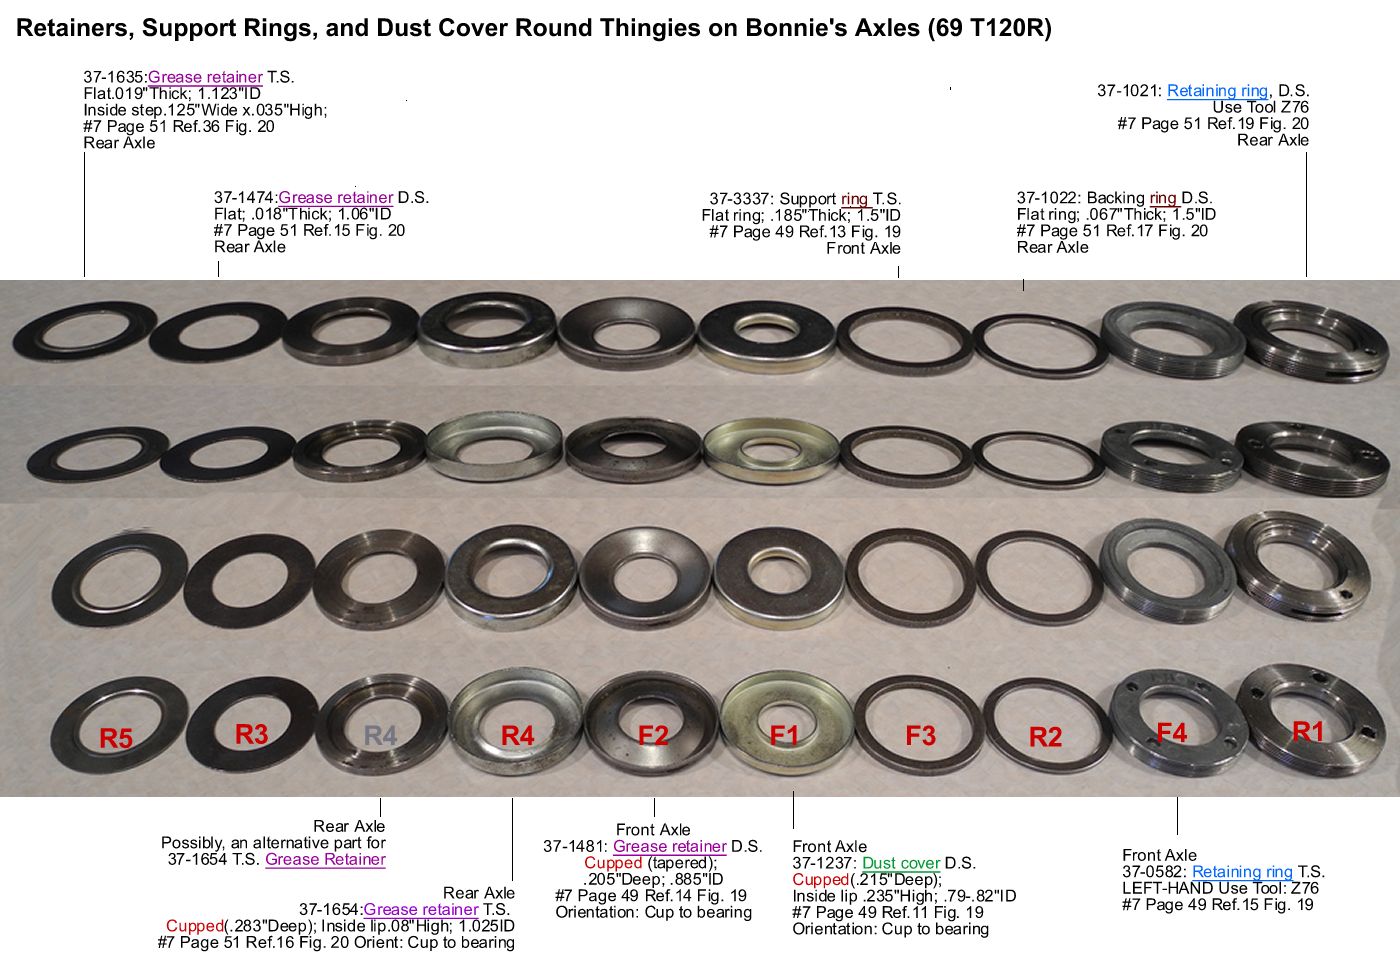 Triumph axle wheel bearings, dust covers, grease retainers, support rings, and retaining rings